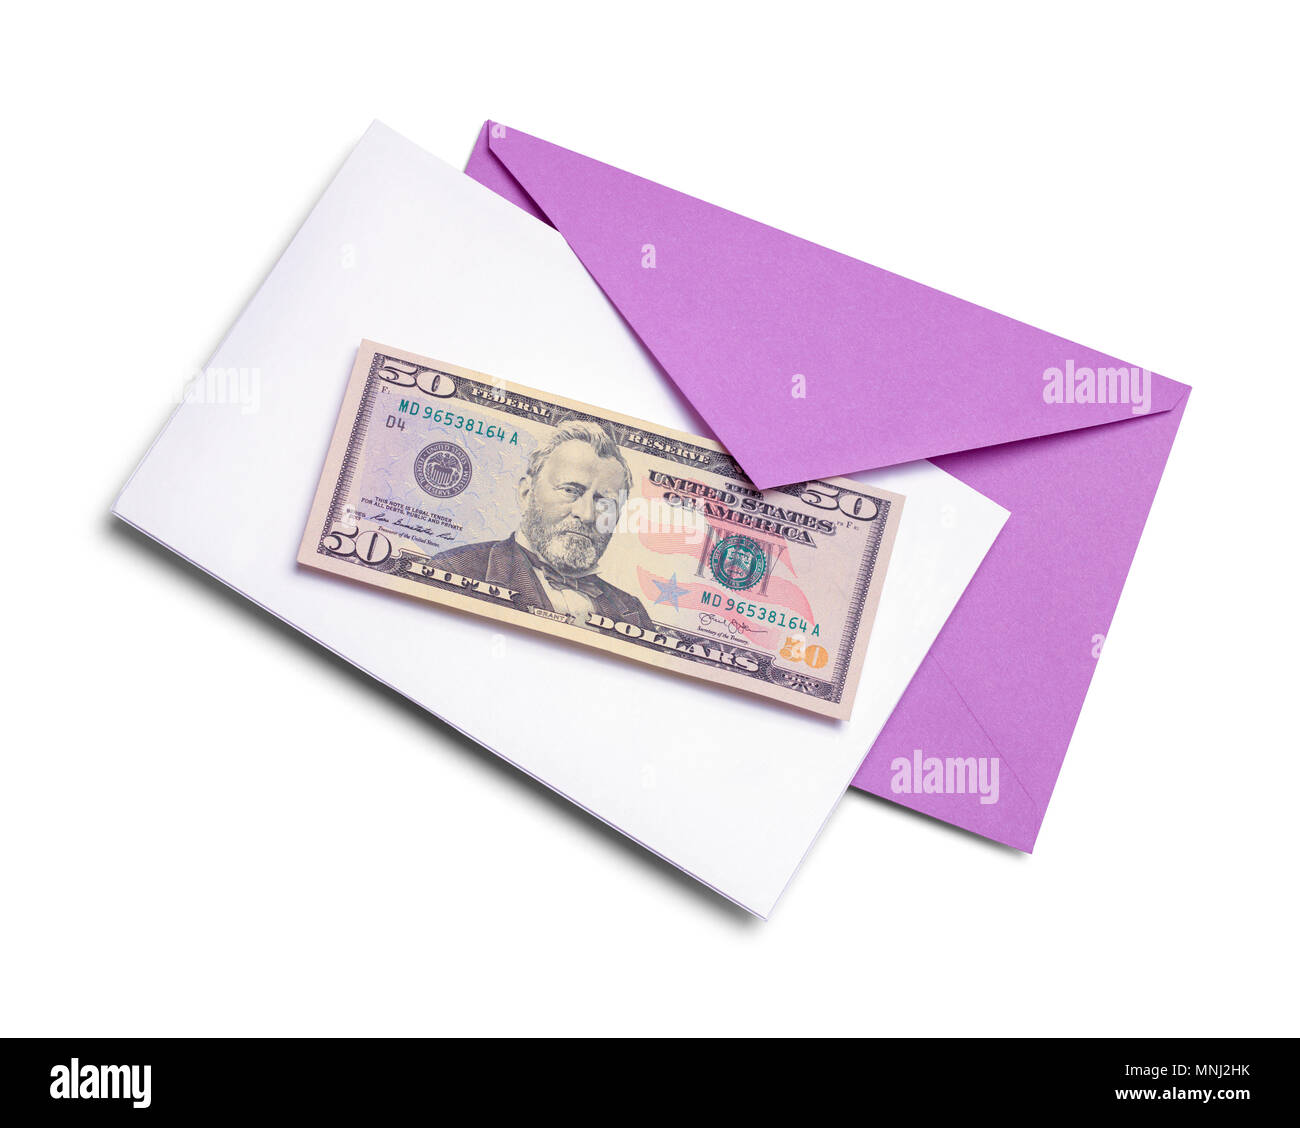 Birthday Card with Money Isolated on White Background. Stock Photo